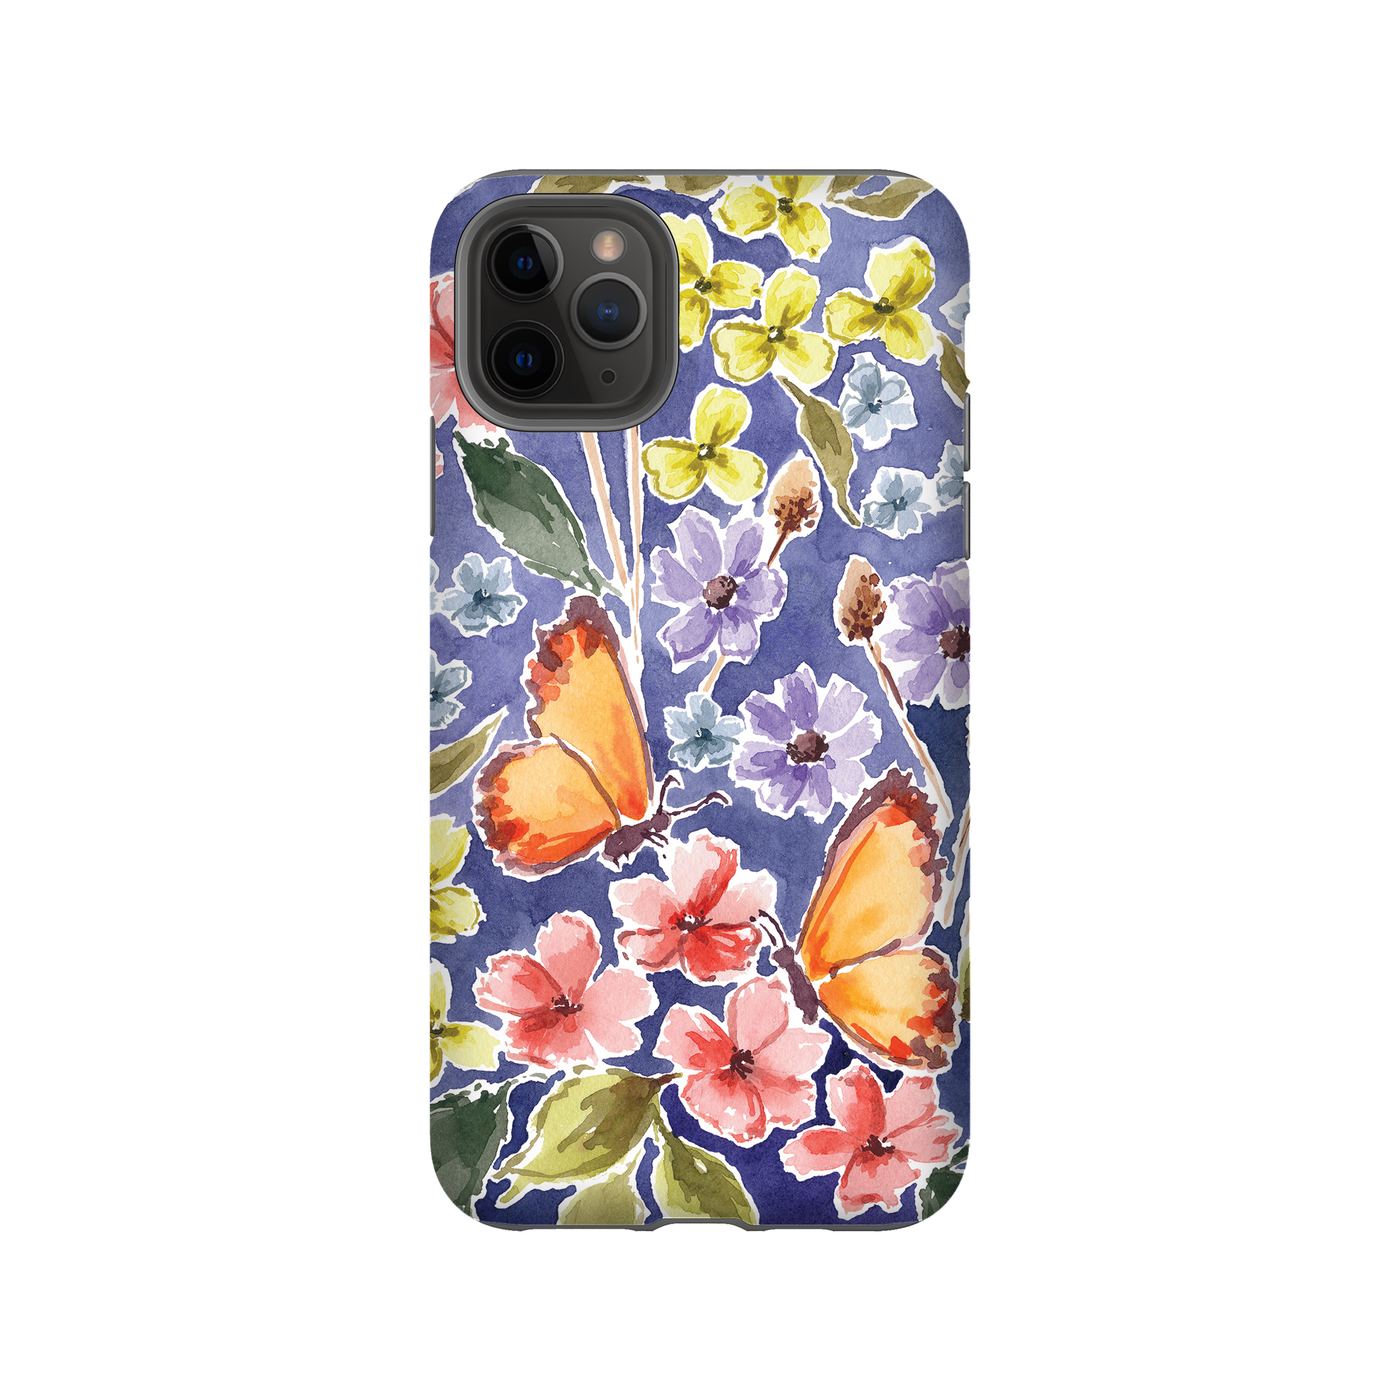 MYSTERY PHONE CASE iPhone 11 Pro Max